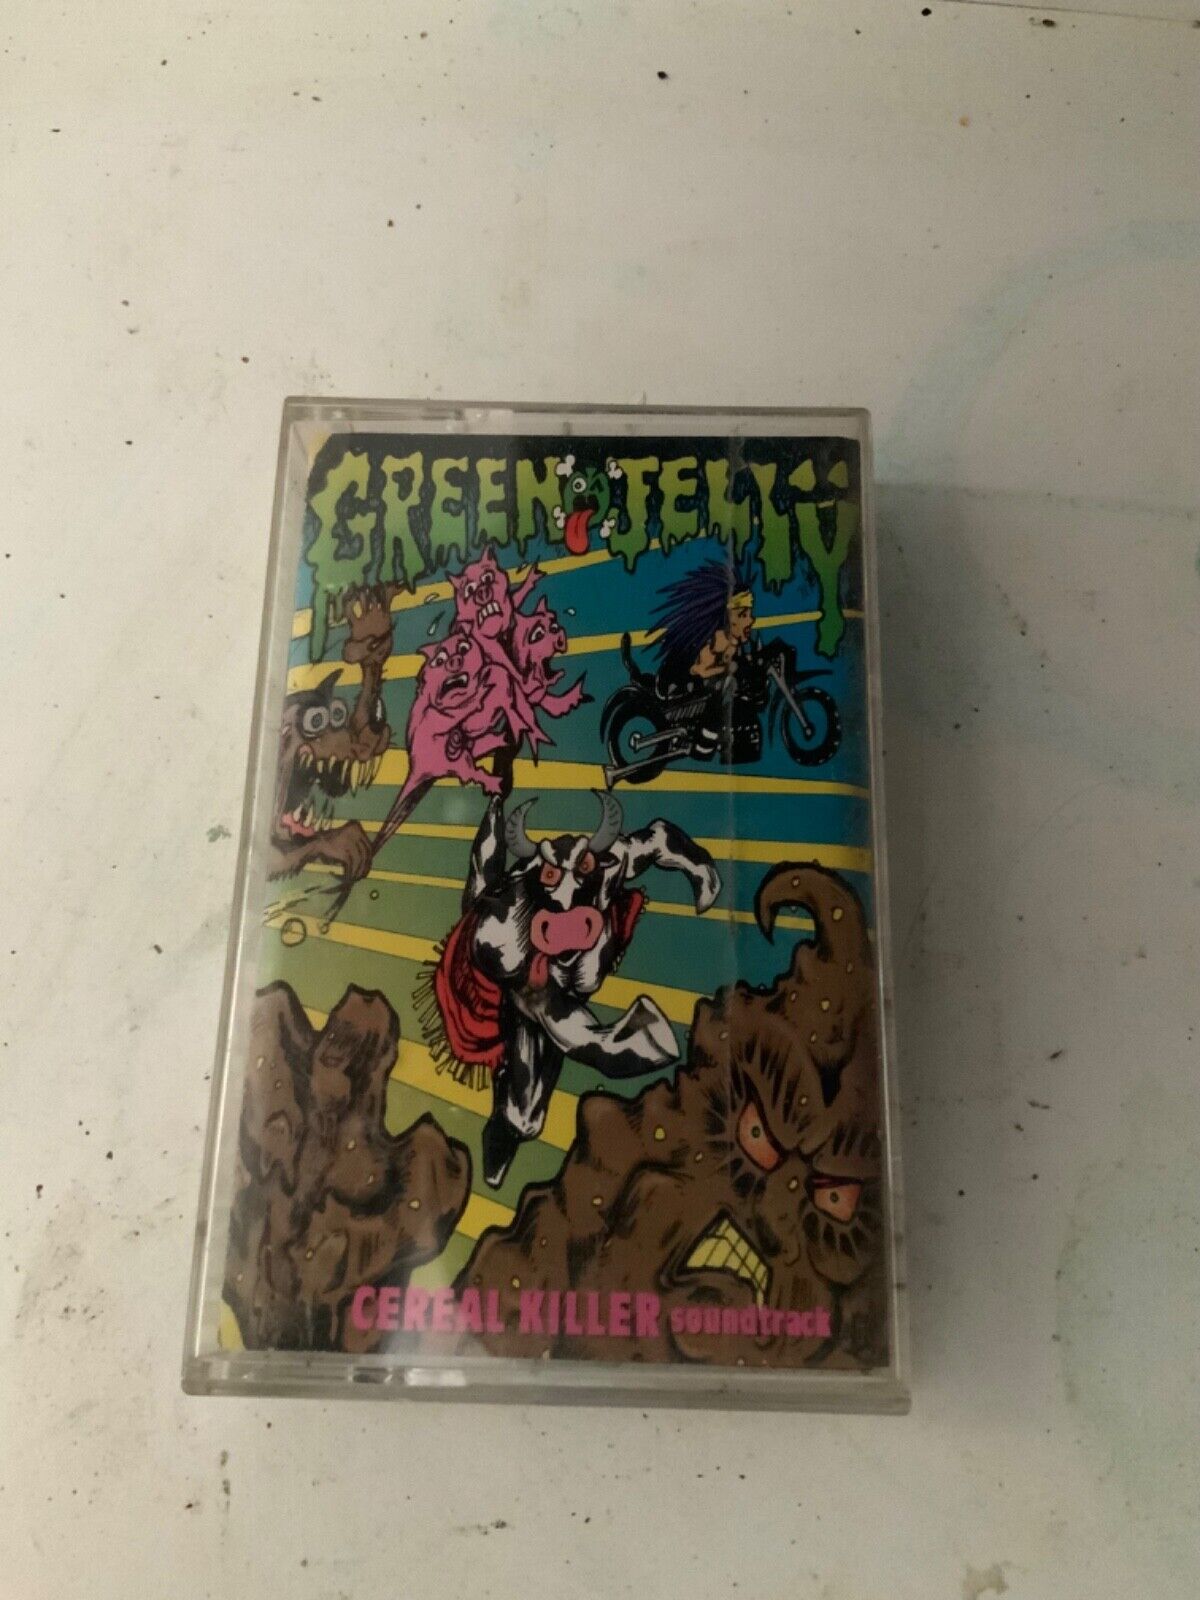 Green Jelly Cereal Killer RARE Cassette tape INDIA indian Clamshell vintage 